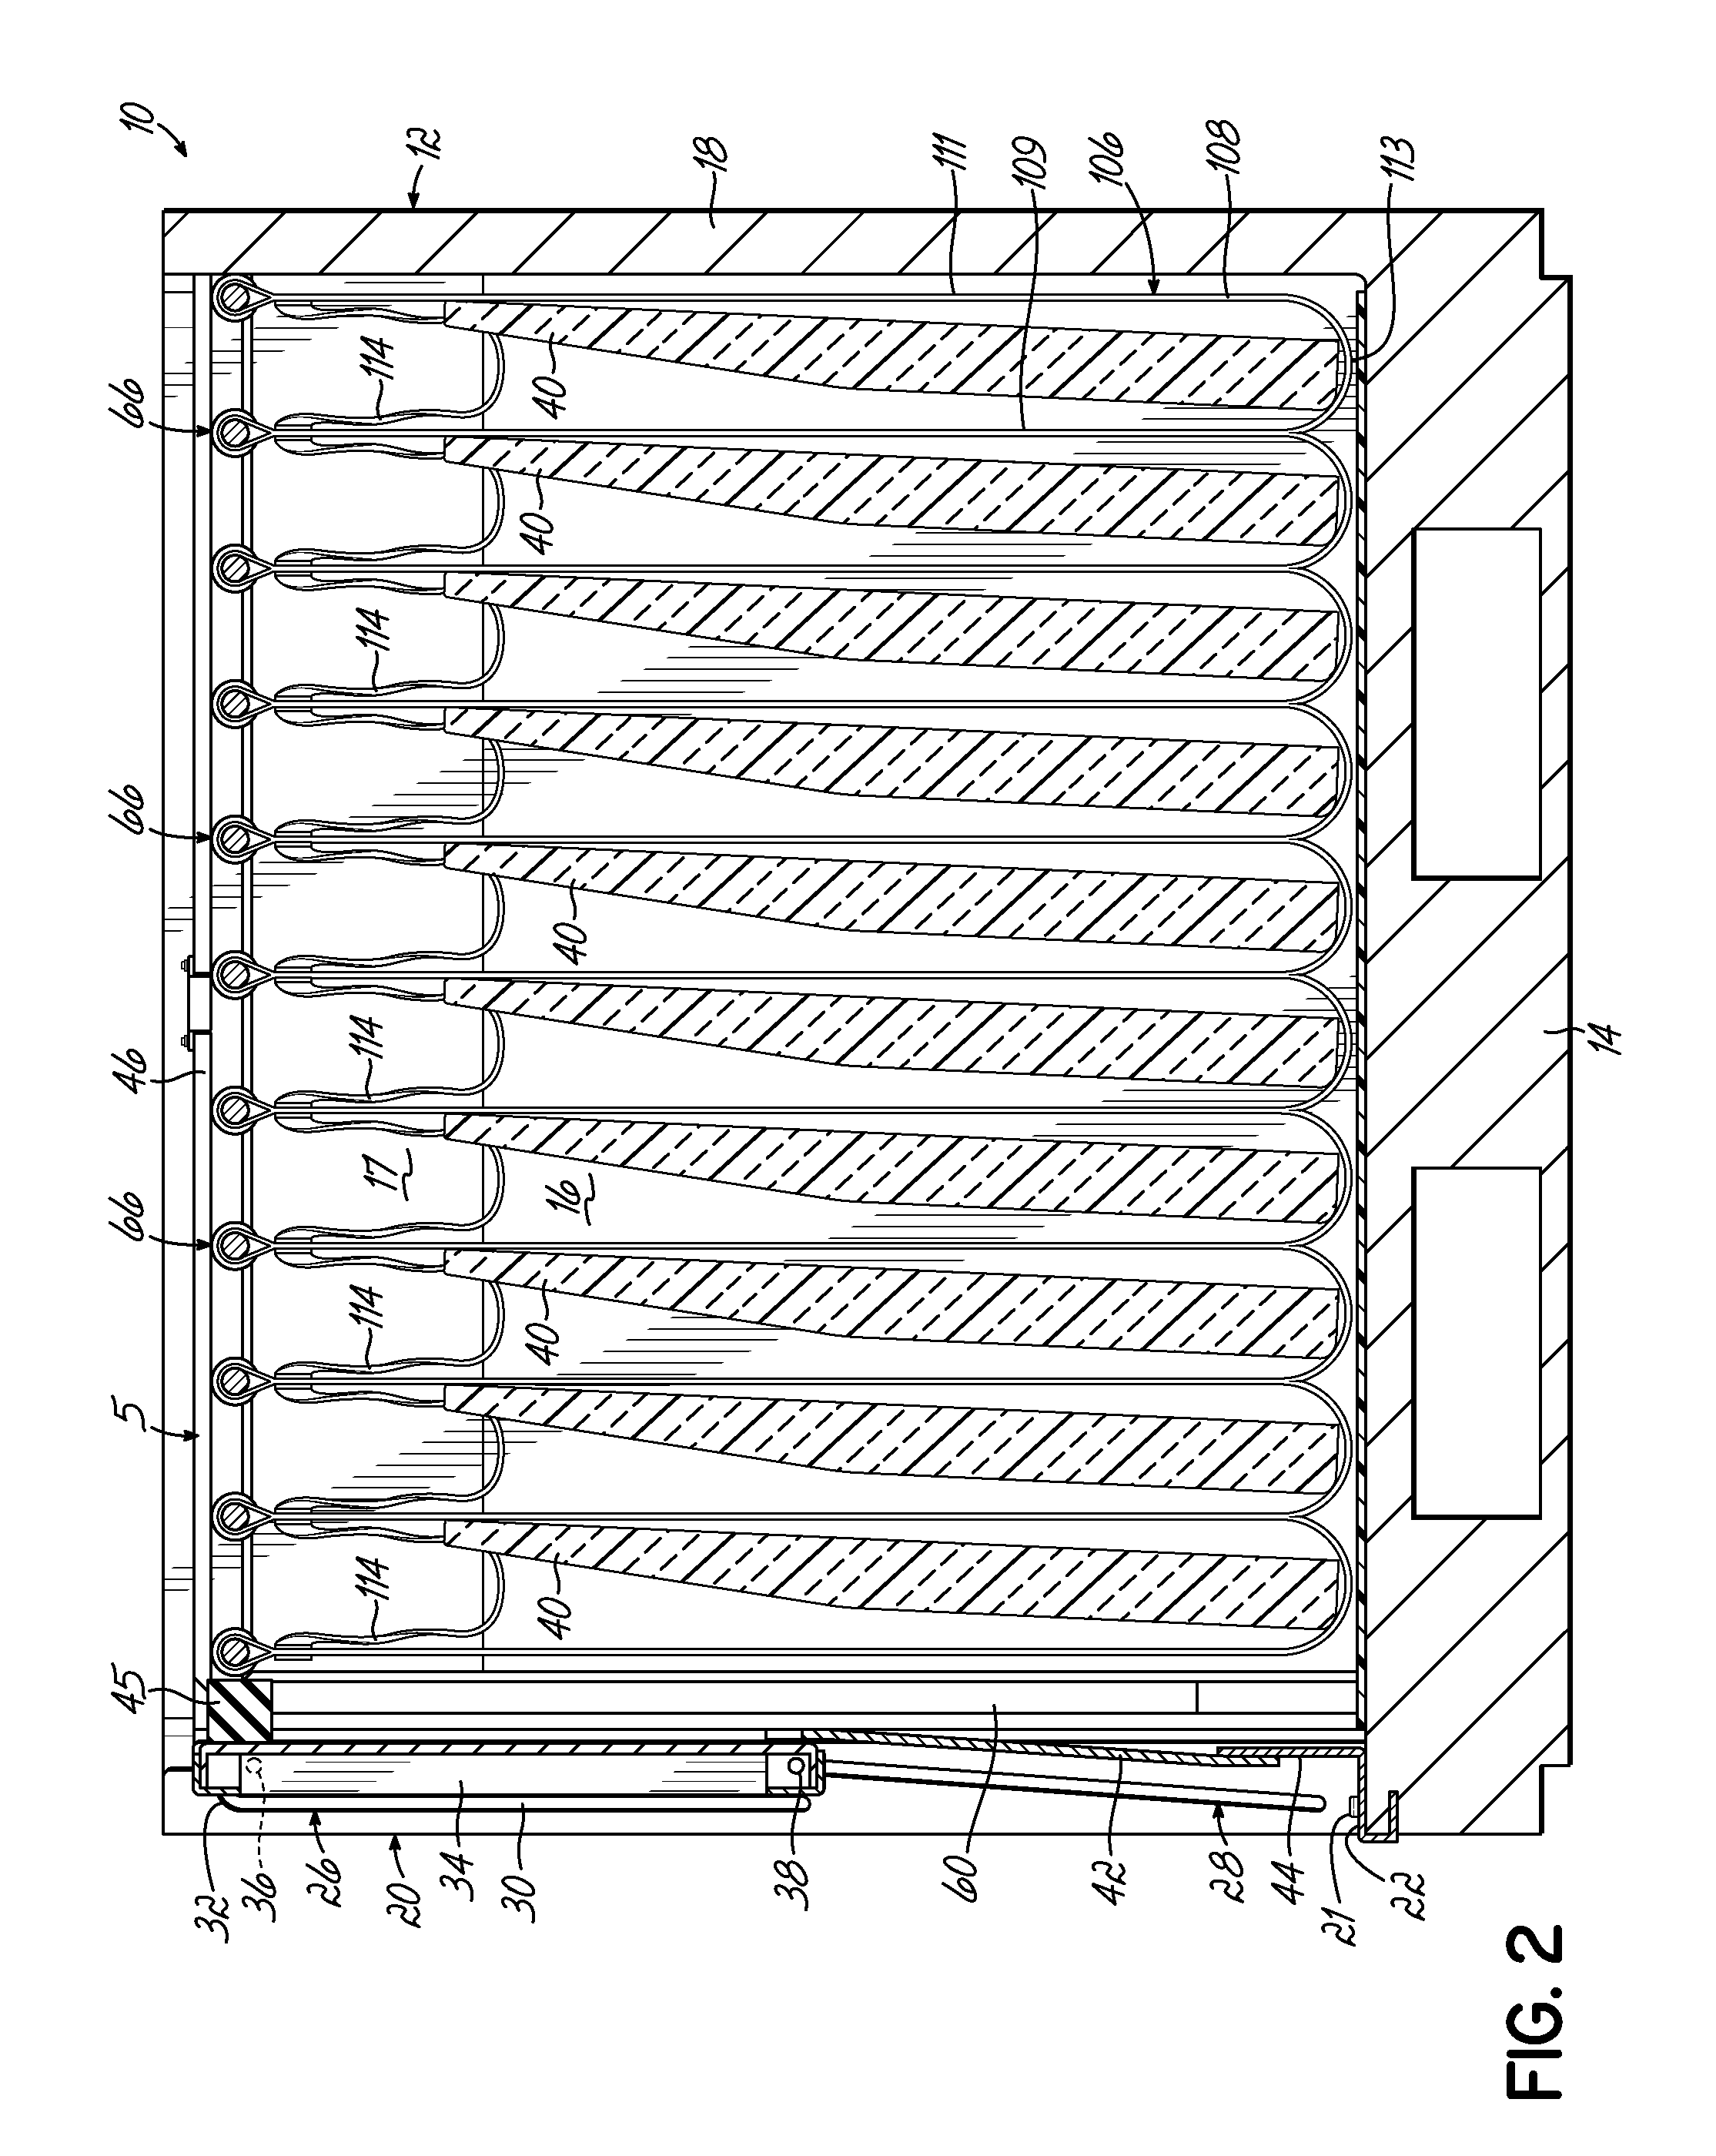 Container Having Movable Dunnage Supports For Supporting Dunnage and Movable Door